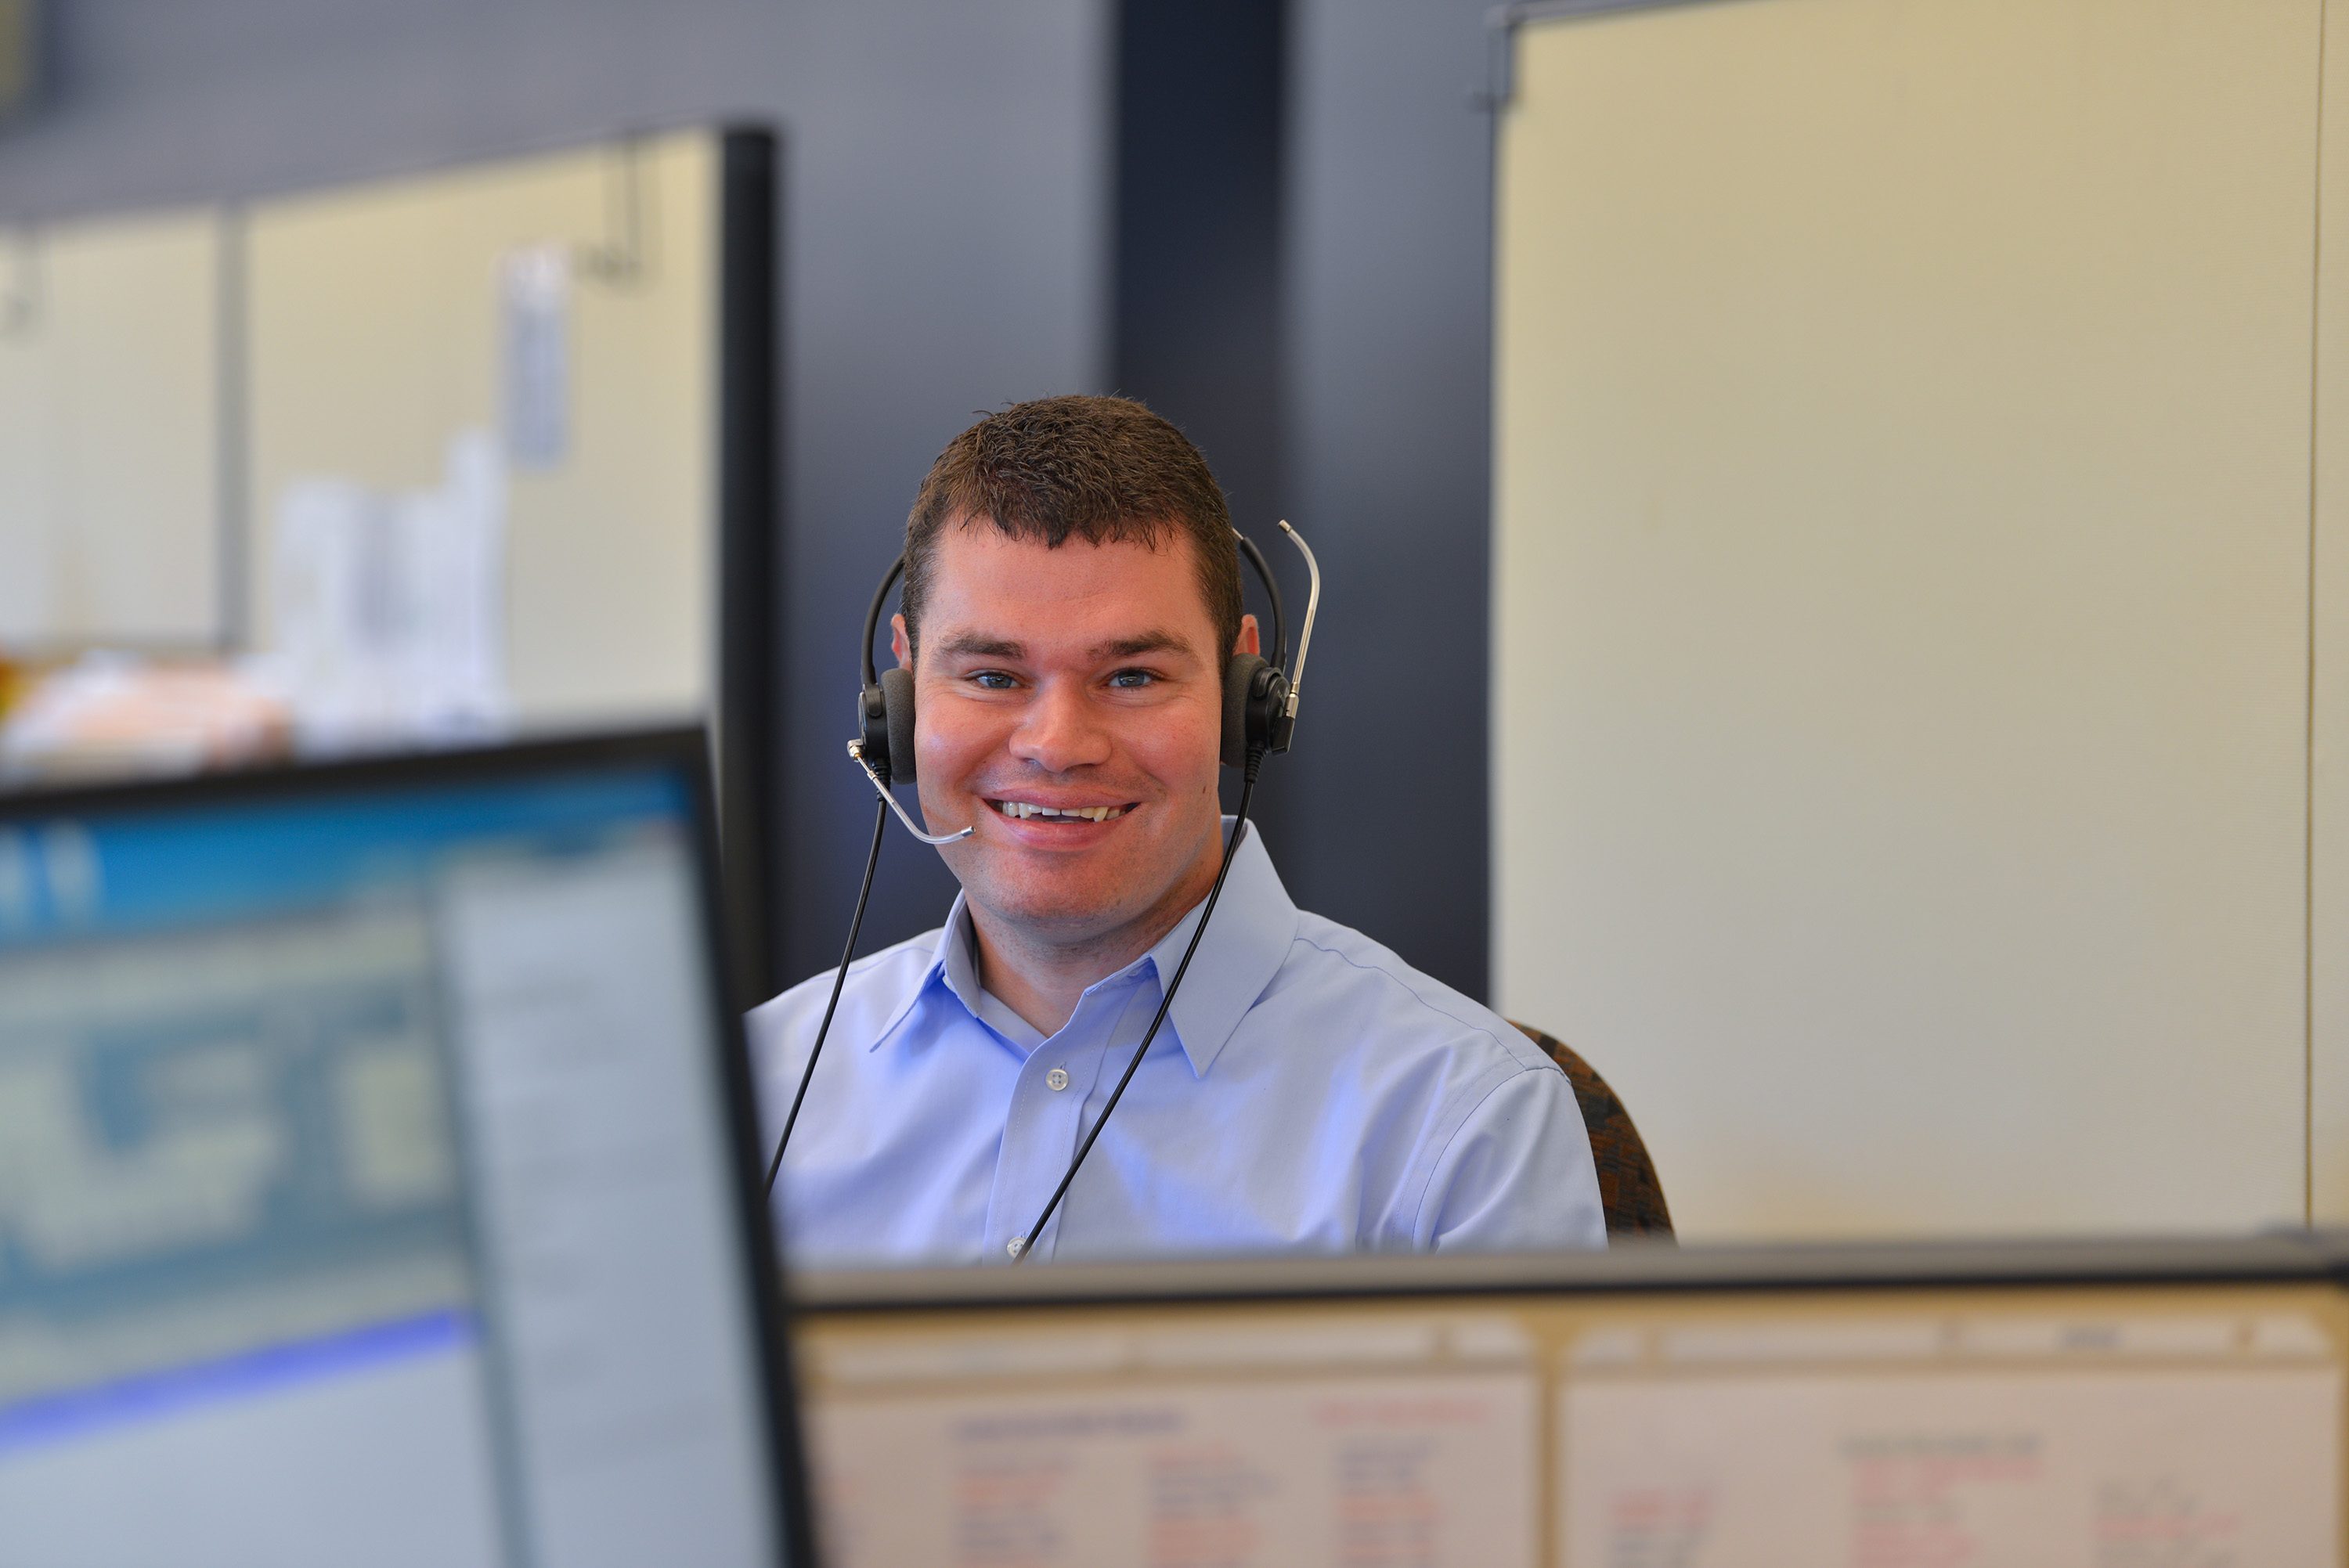 Tim Vernon, wearing a headset and sitting at his desk at work